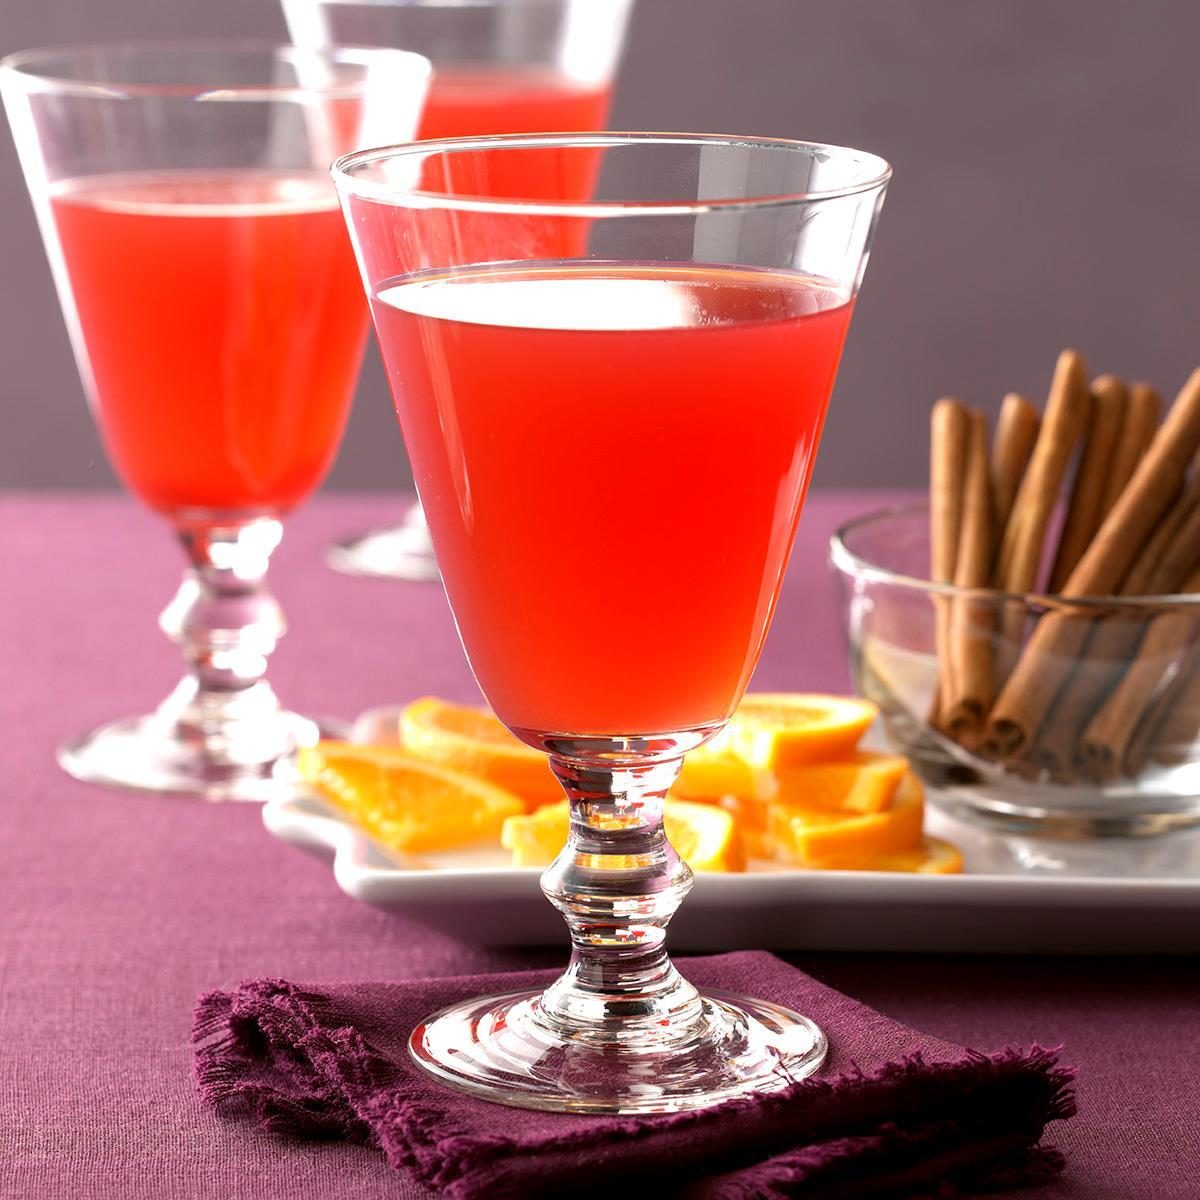 Hot Spiced Cranberry Drink